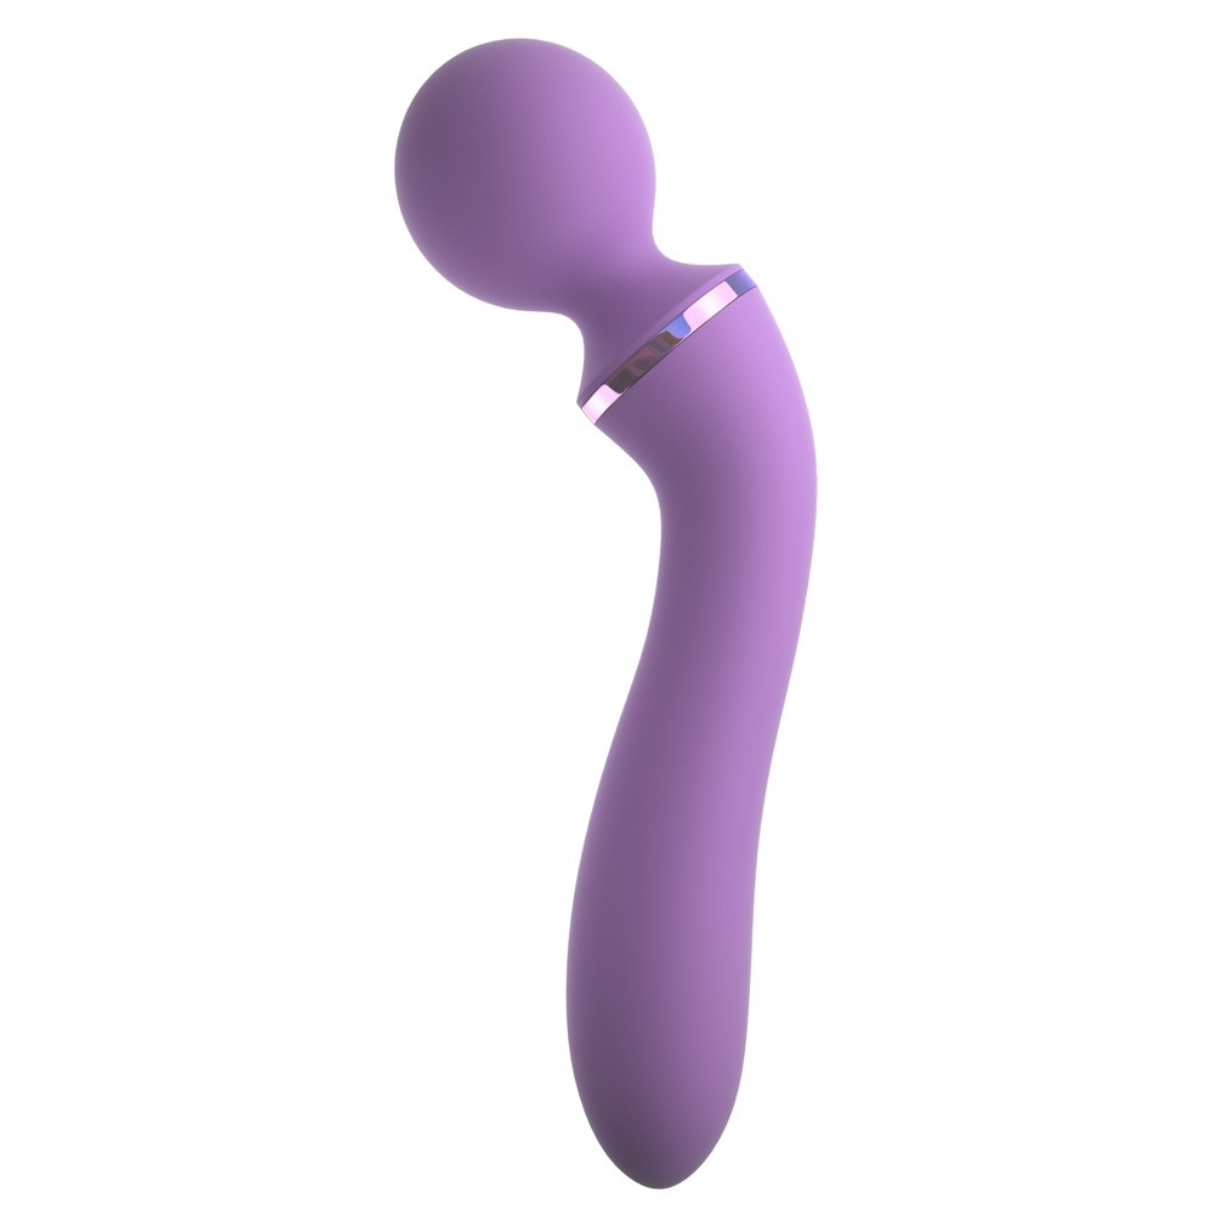 FANTASY FOR HER Duo Vibrator Massage-Her Wand